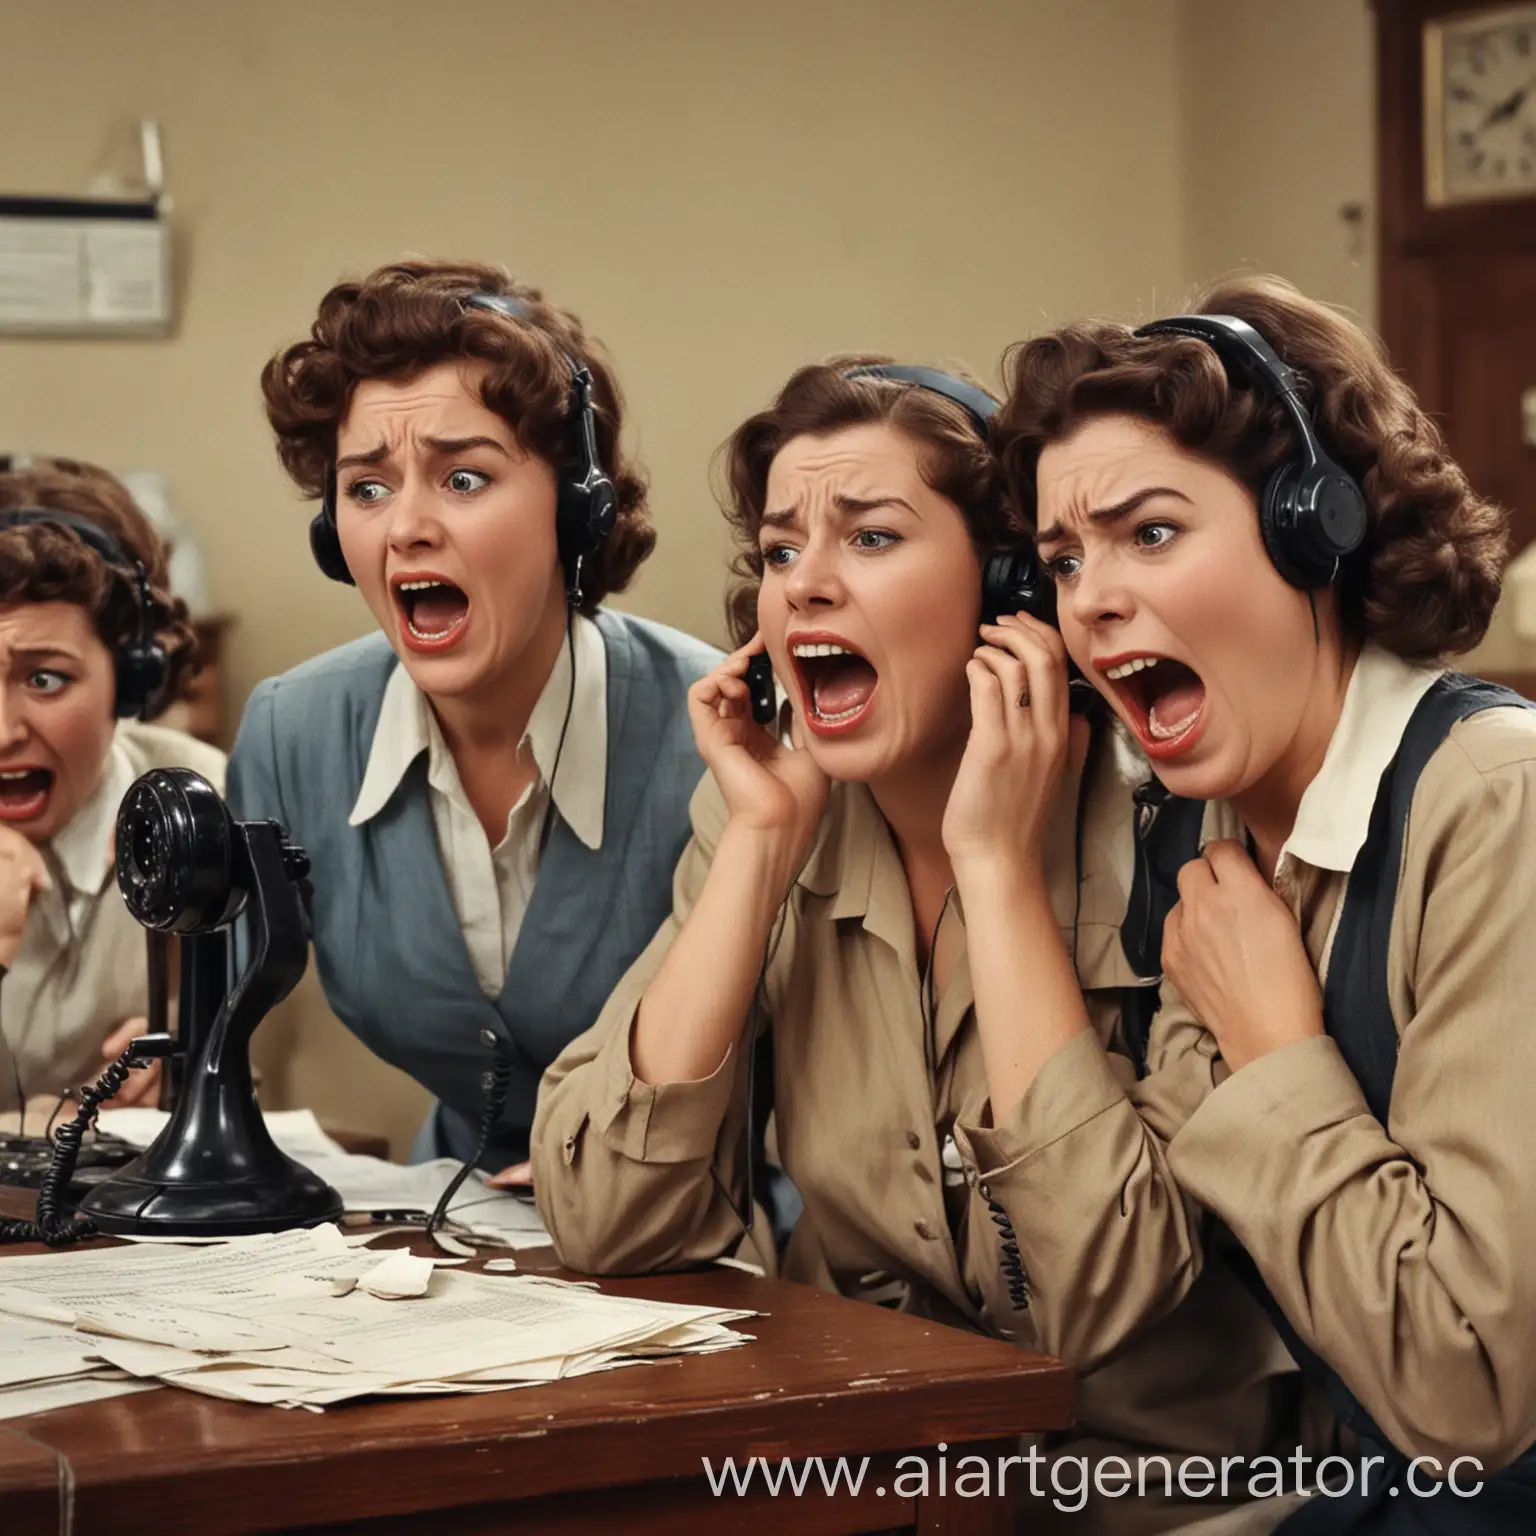 Telephone-Operators-in-Panic-Chaos-and-Tears-in-the-Call-Center